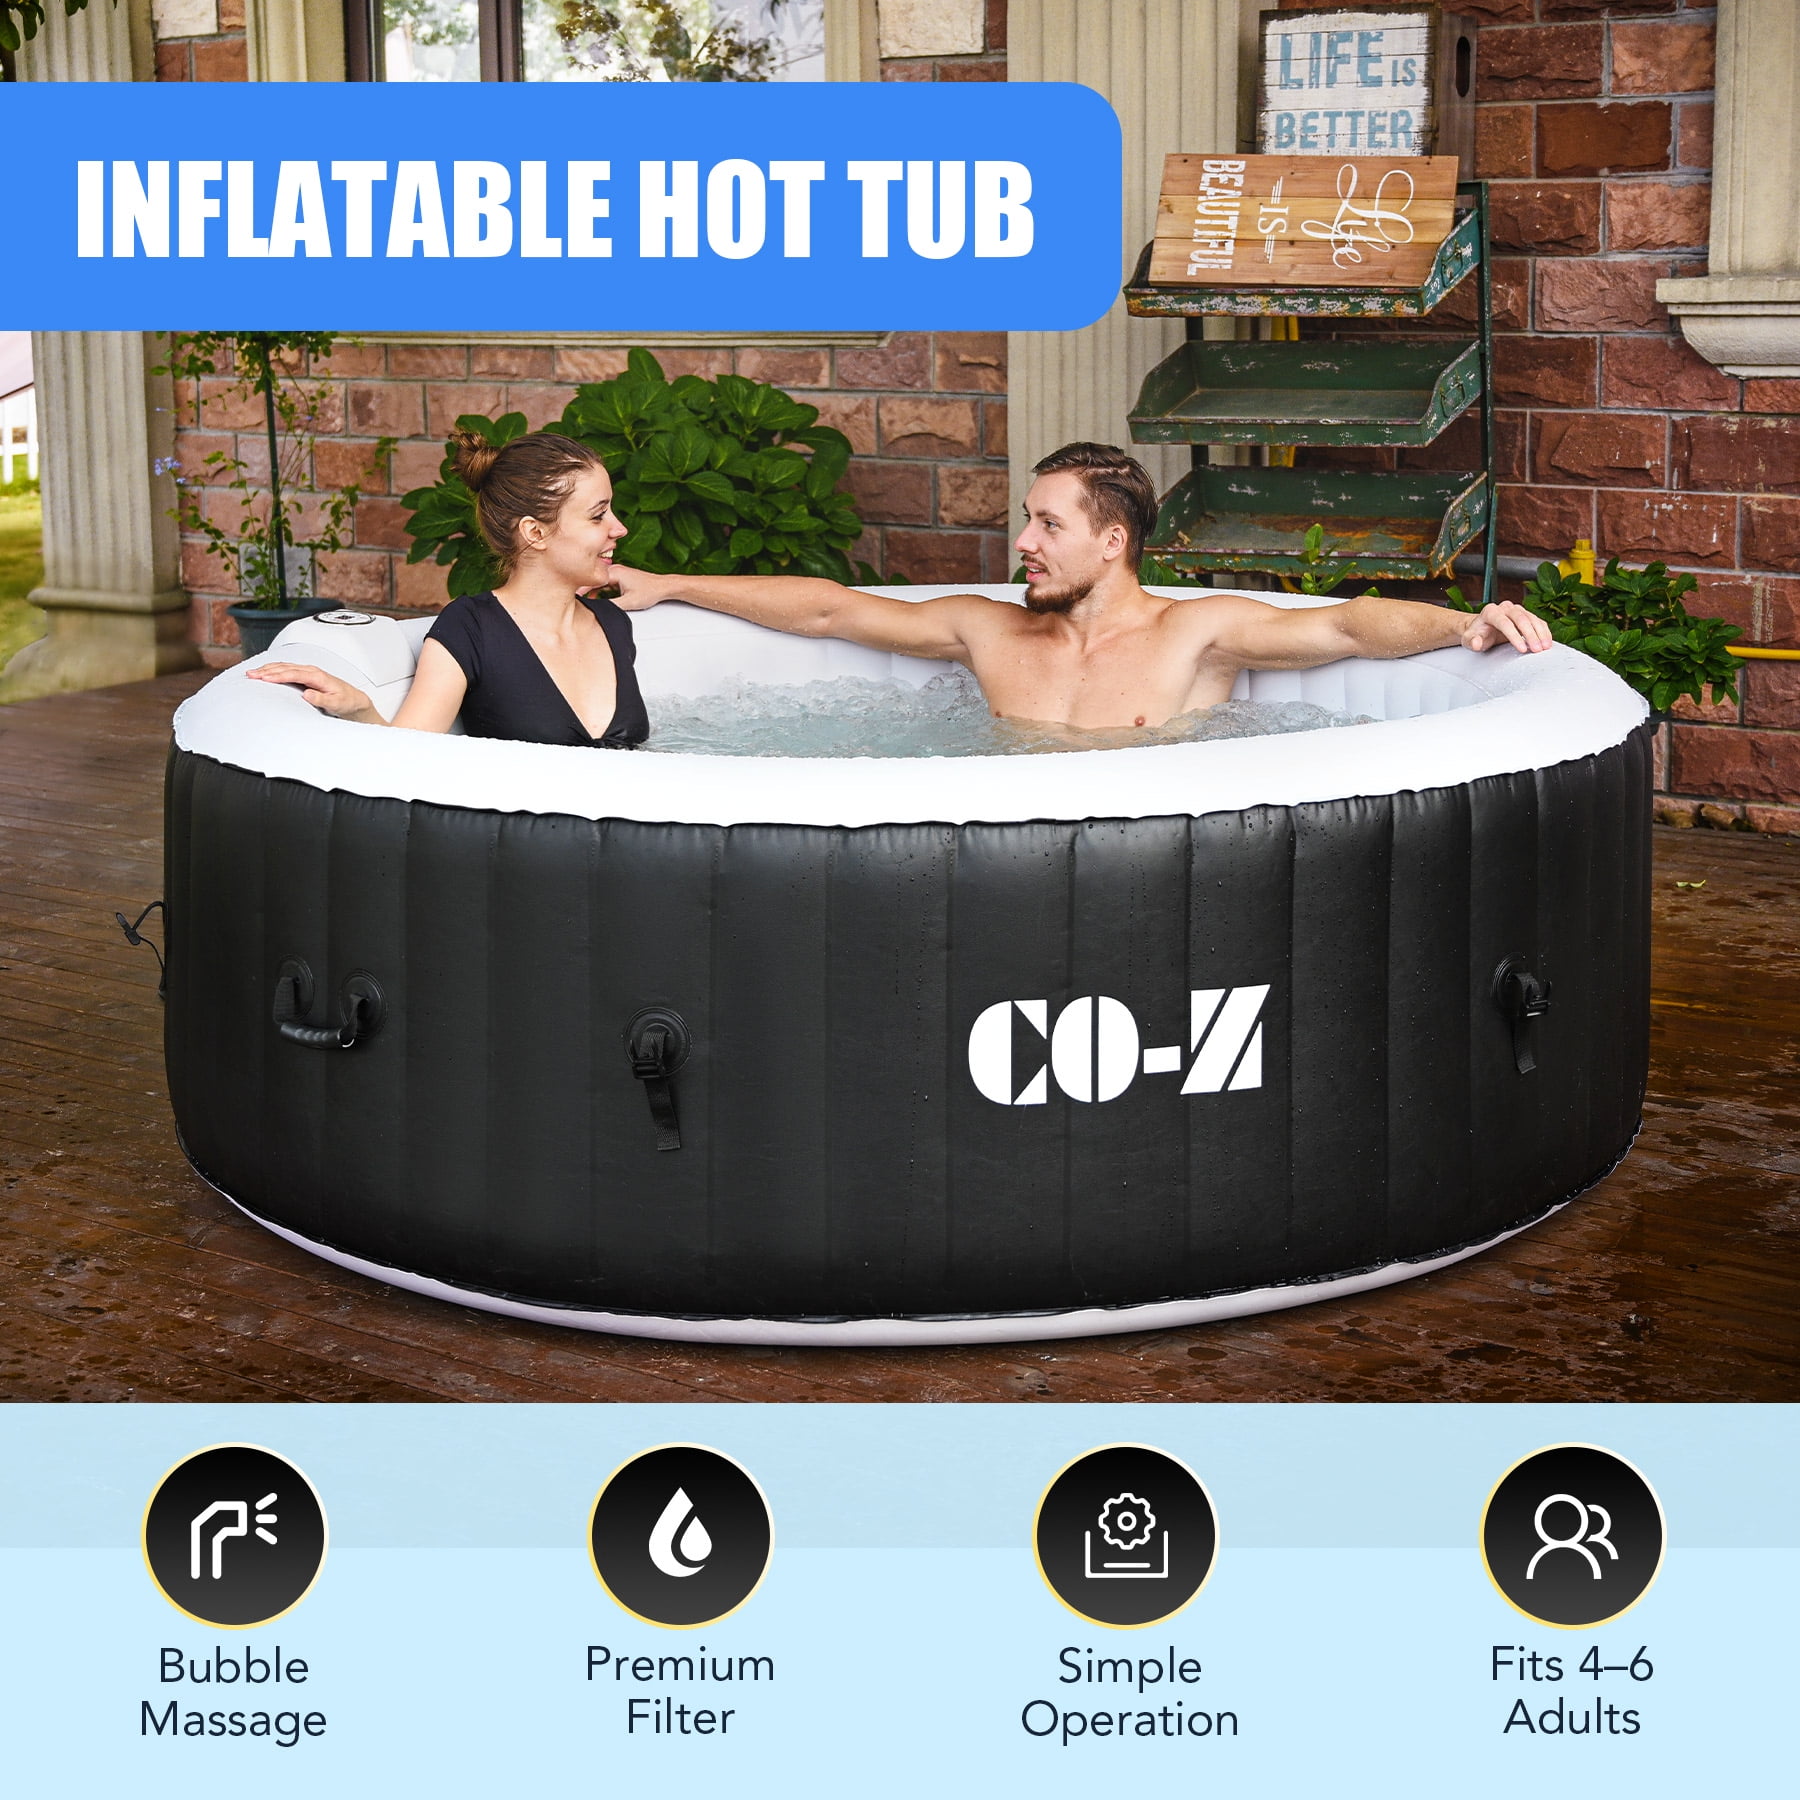 *OFFICIAL* Lay Z Spa Inflatable Hot Tub Puncture Repair Kit BUY 2 GET 2 FREE!! 